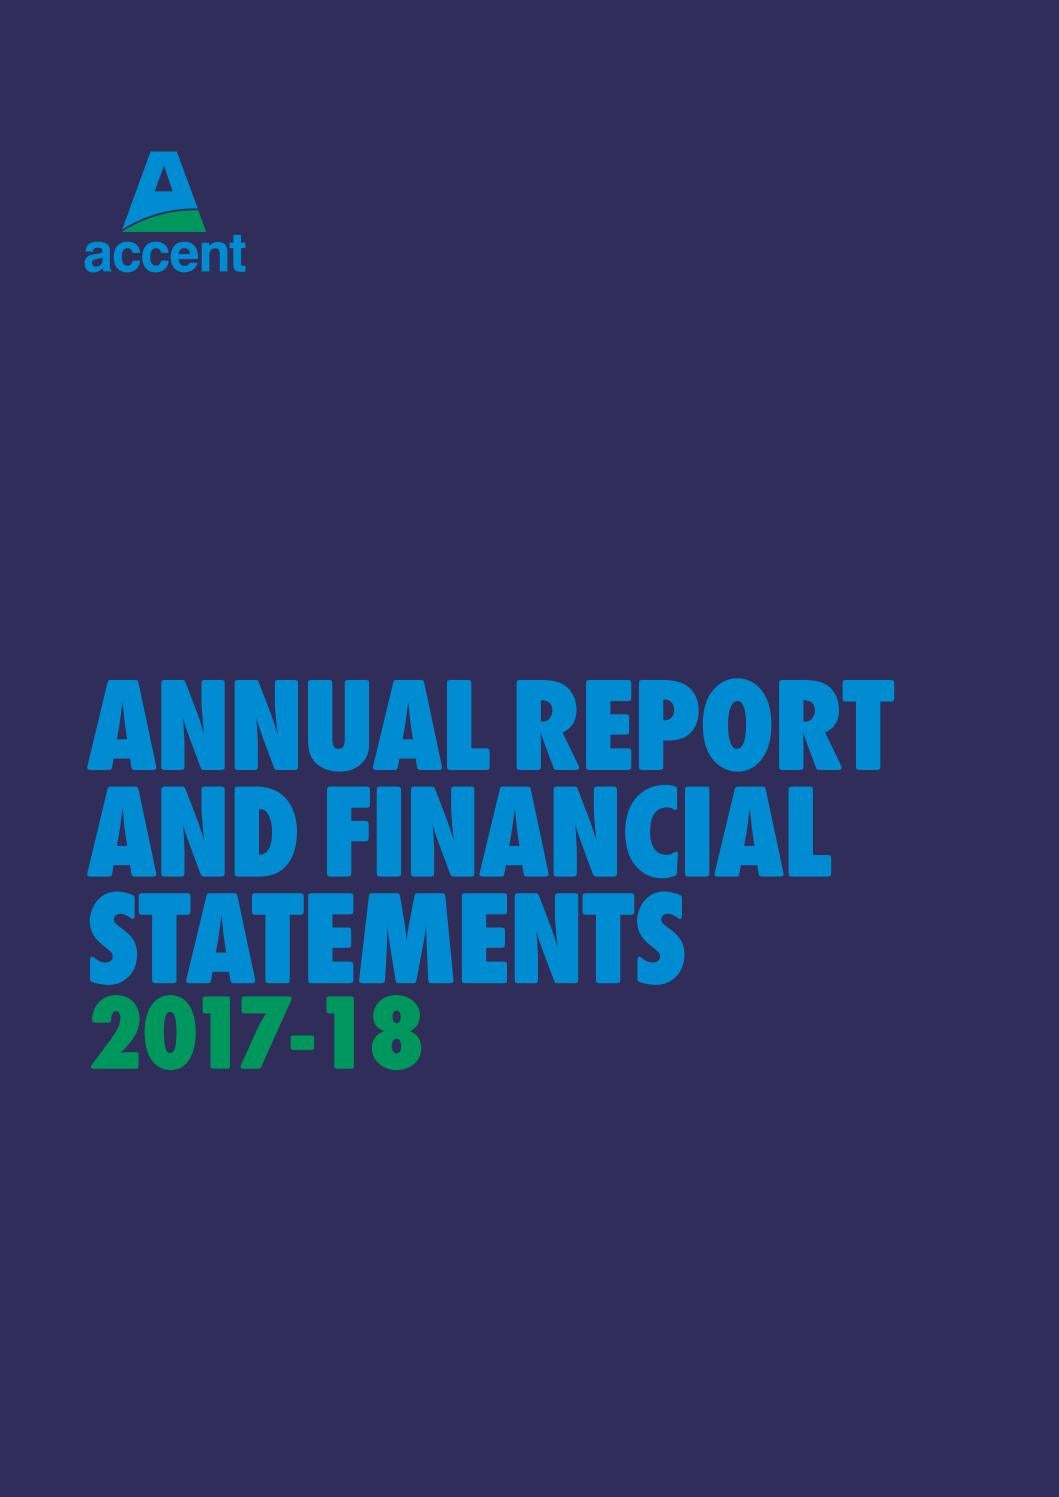 Annual Report And Financial Statements 2017 18 By Accent Group Issuu